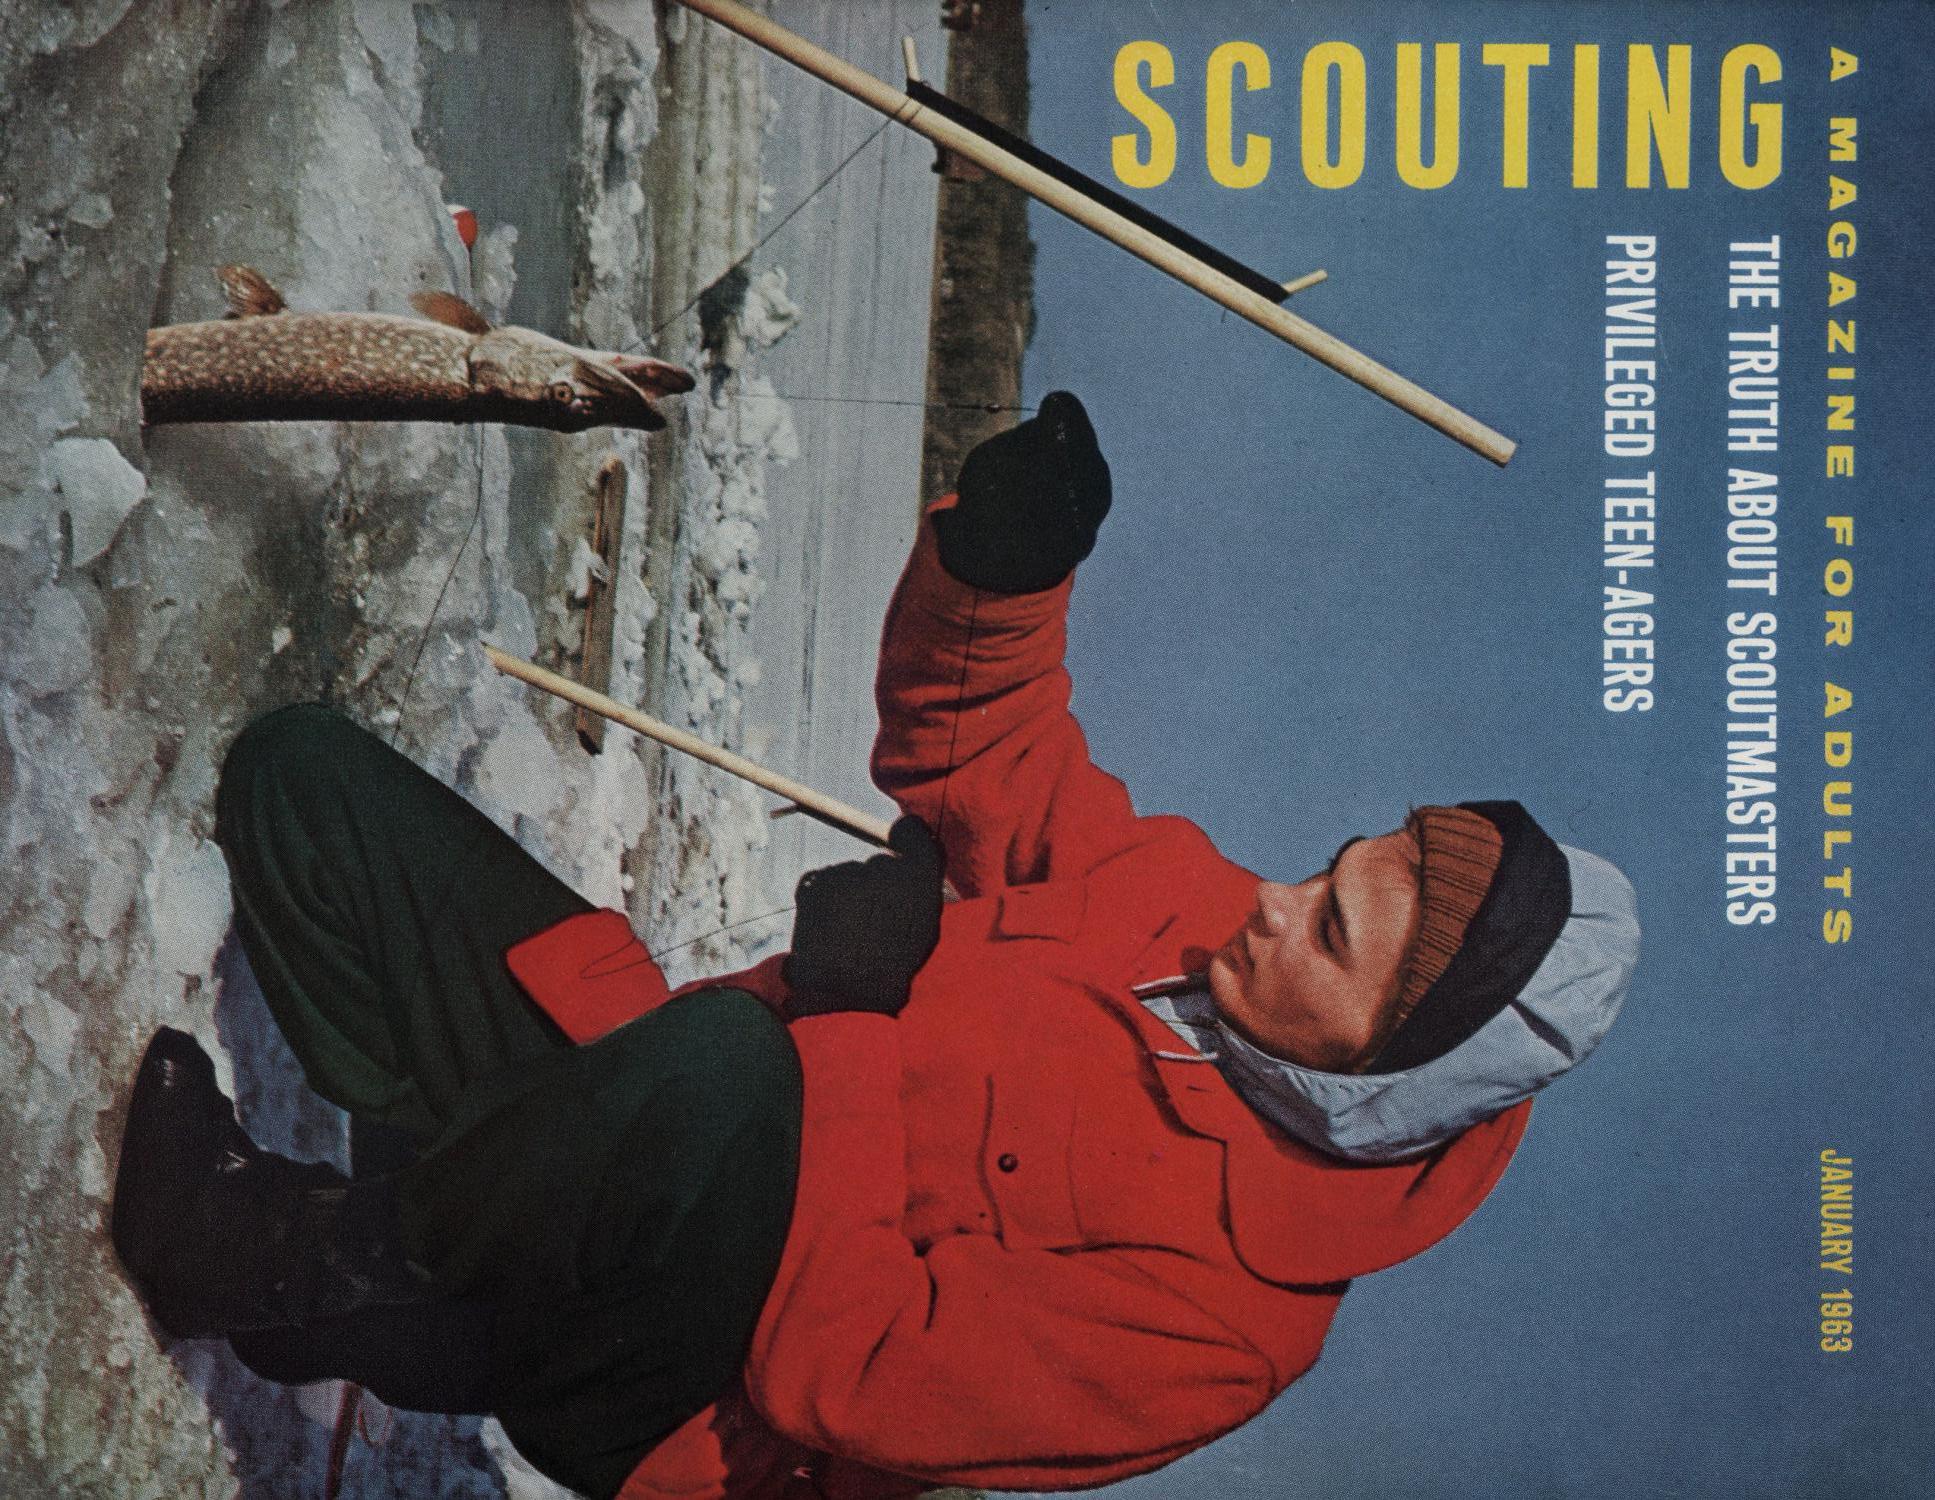 Scouting, Volume 51, Number 1, January 1963
                                                
                                                    Front Cover
                                                